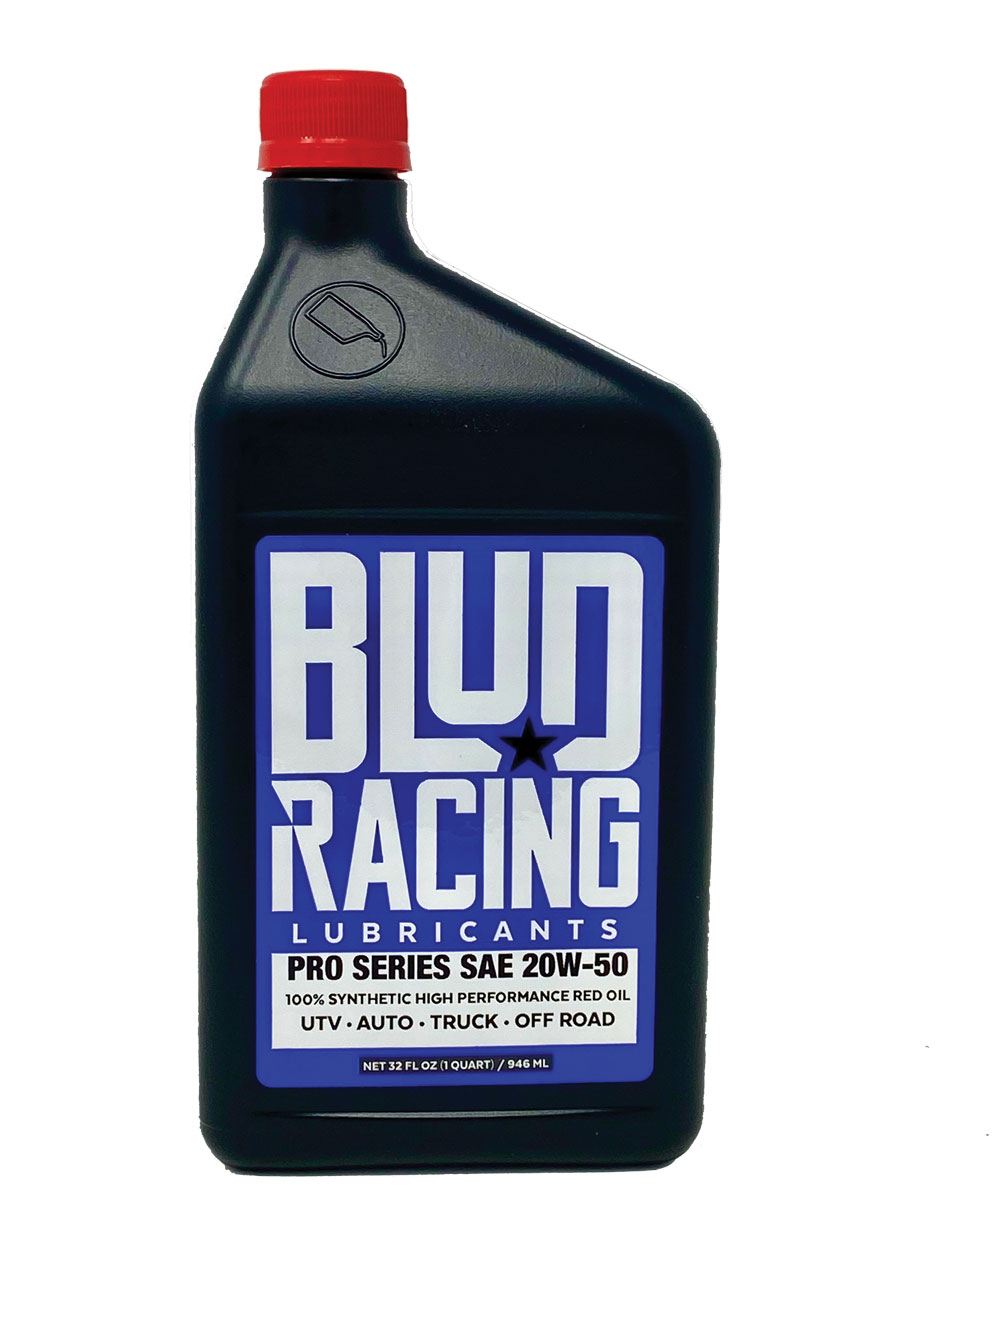 Race Fluids and Lubricants: Science FrictionPerformance Racing